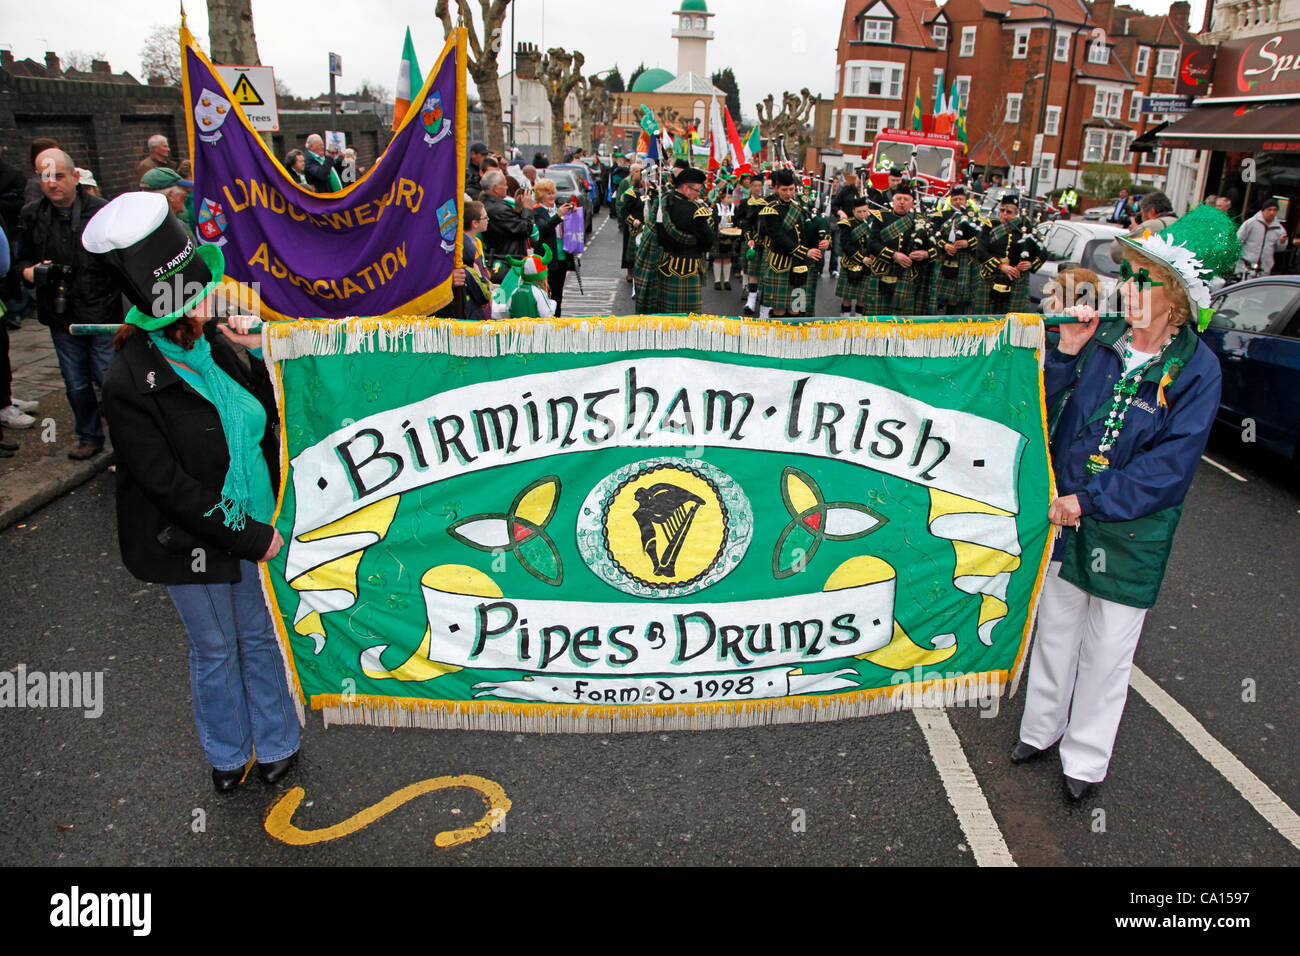 17/03/2012 London. The Brent St. Patrick's Day Parade in Willesden, London which is the only London parade celebrating Saint Patricks Day on the actual day. Stock Photo